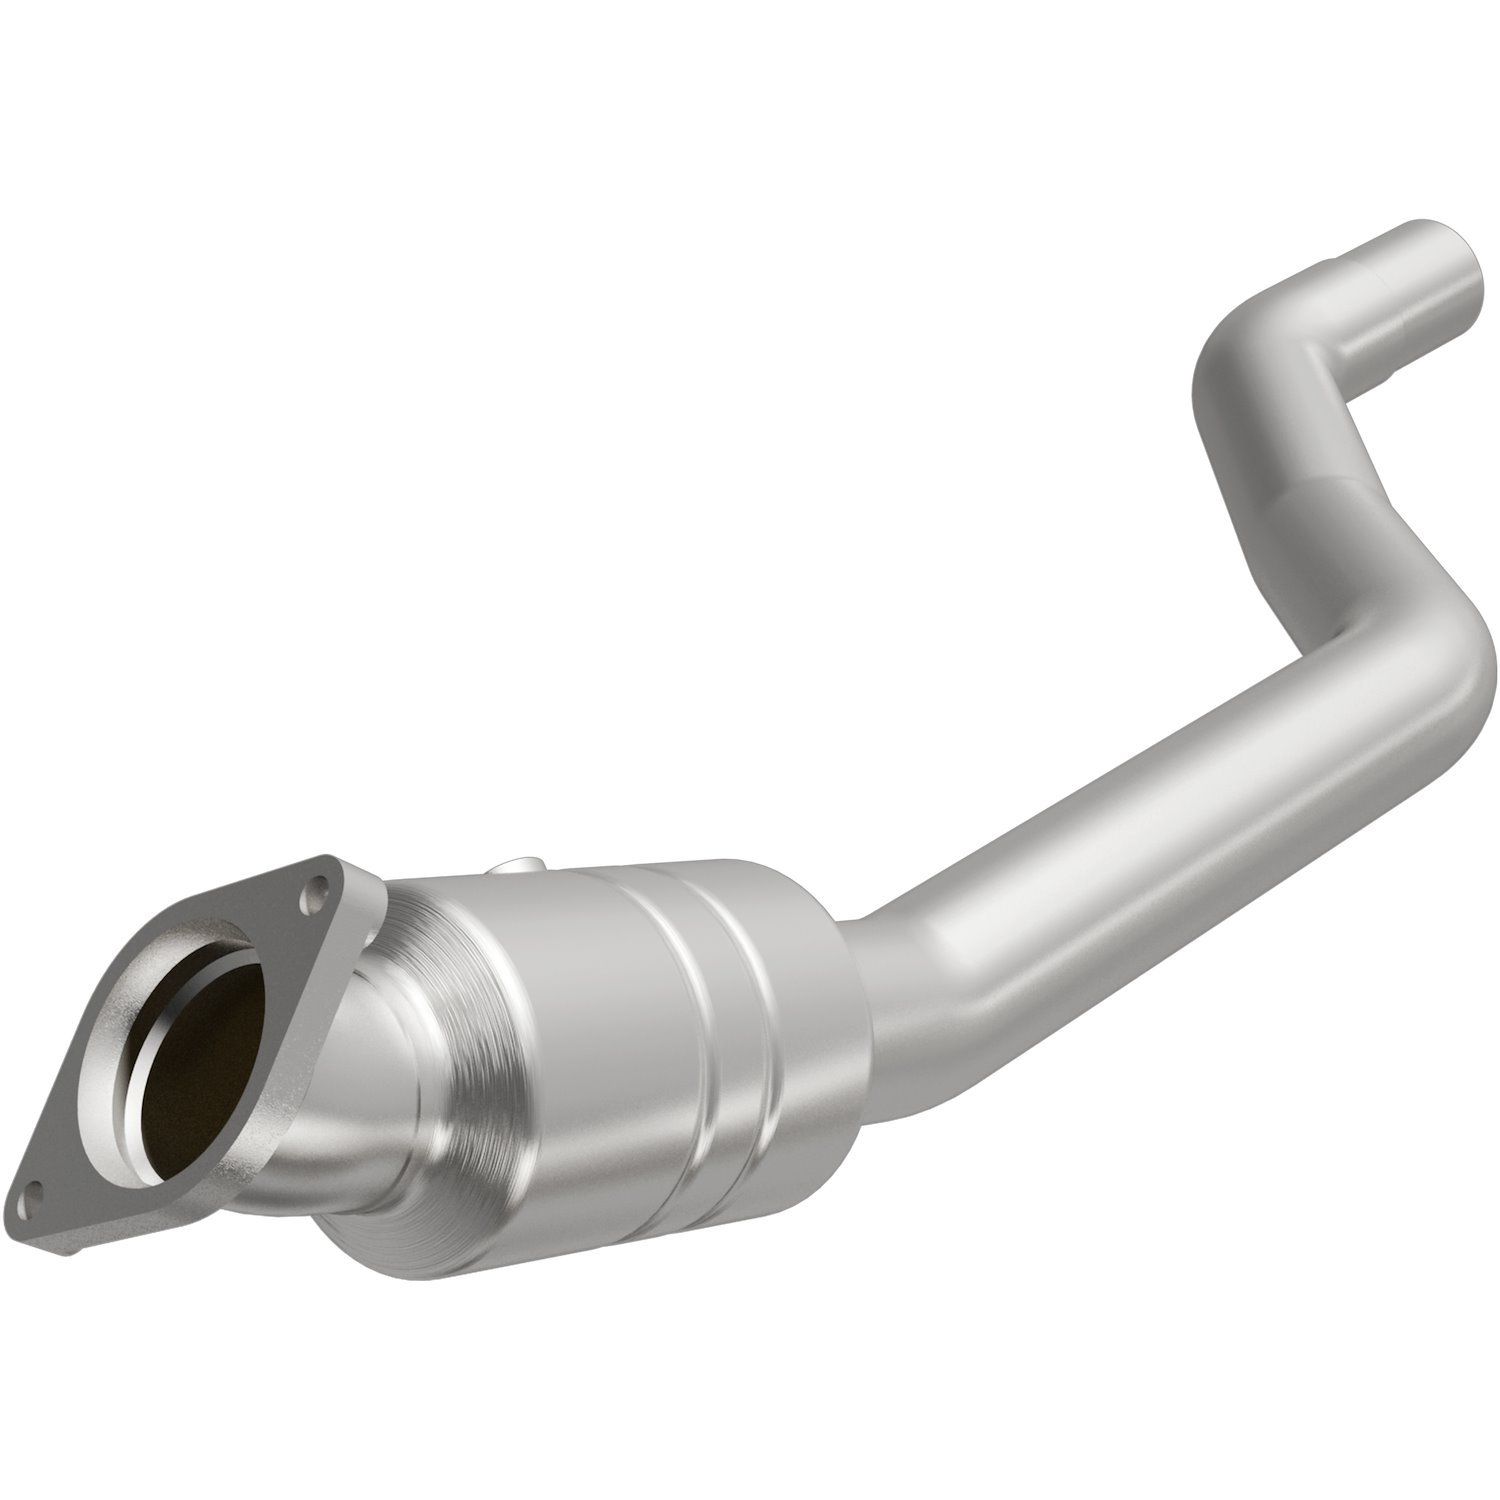 OEM Grade Federal / EPA Compliant Direct-Fit Catalytic Converter 52478